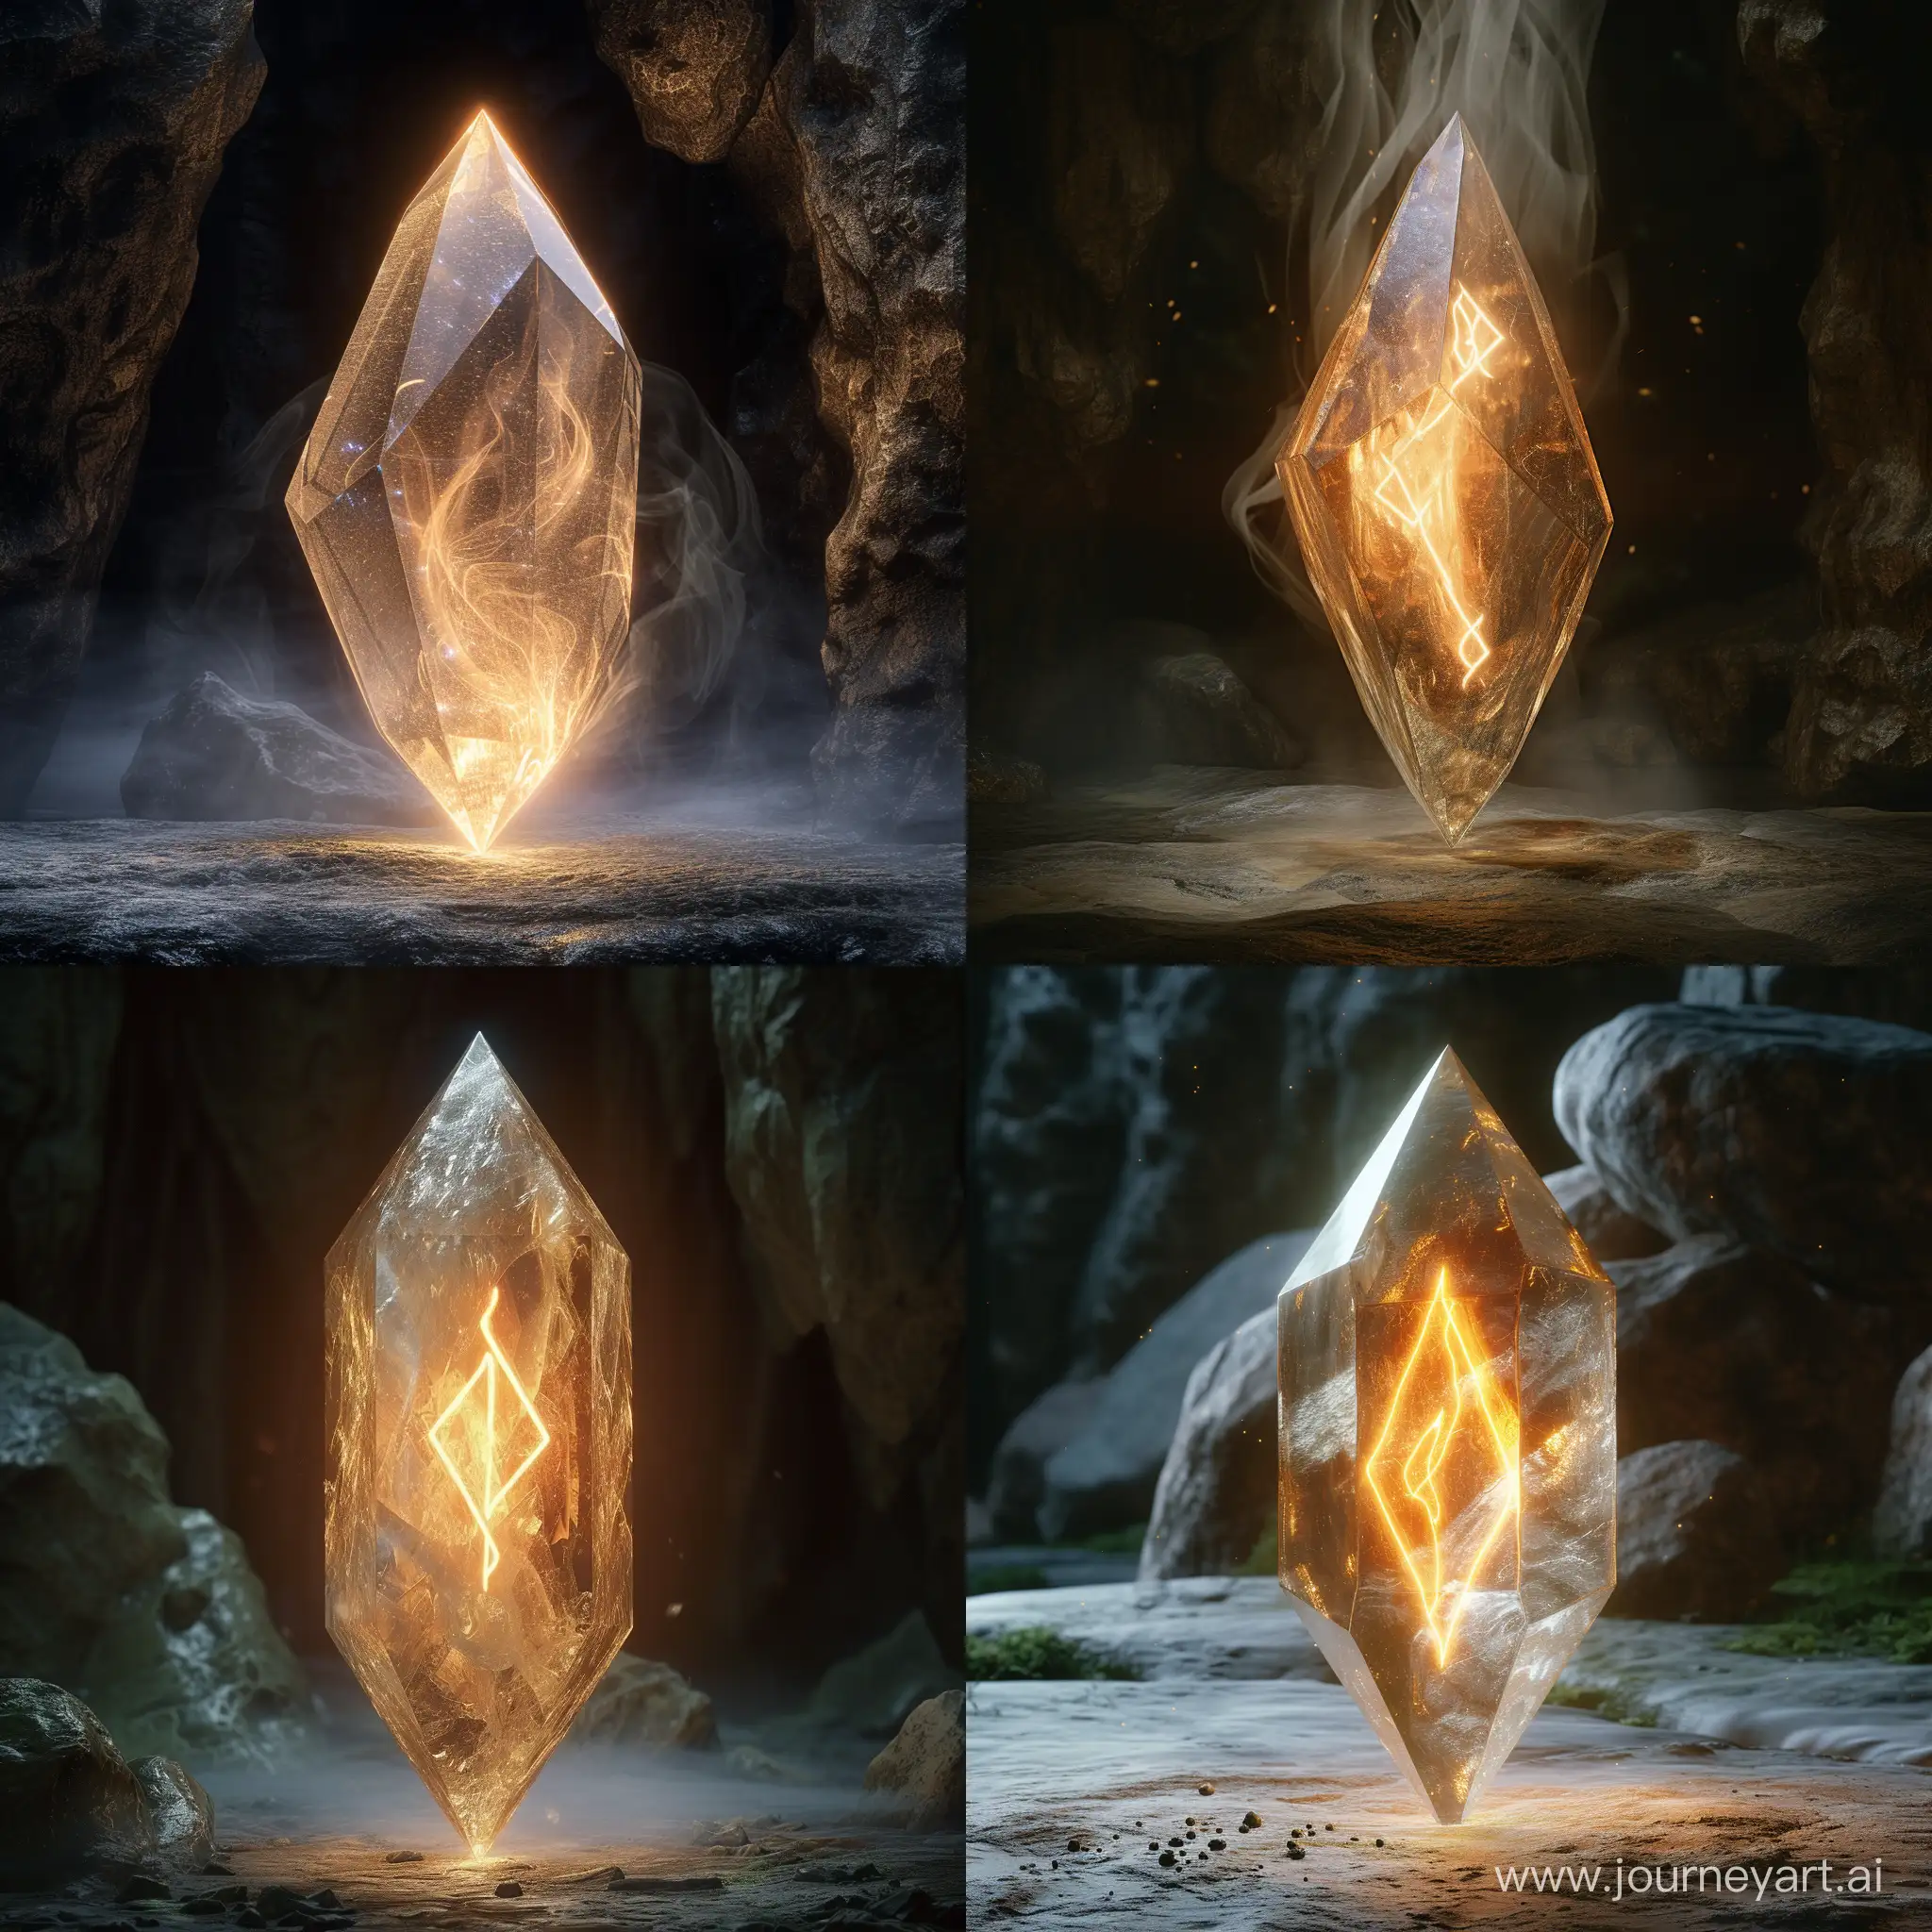 translucent light diamond-shaped crystal
inside with a light haze in the shape of an
flame sign called essence, cave, lotr,
realistic, fantasy, 4k, hd